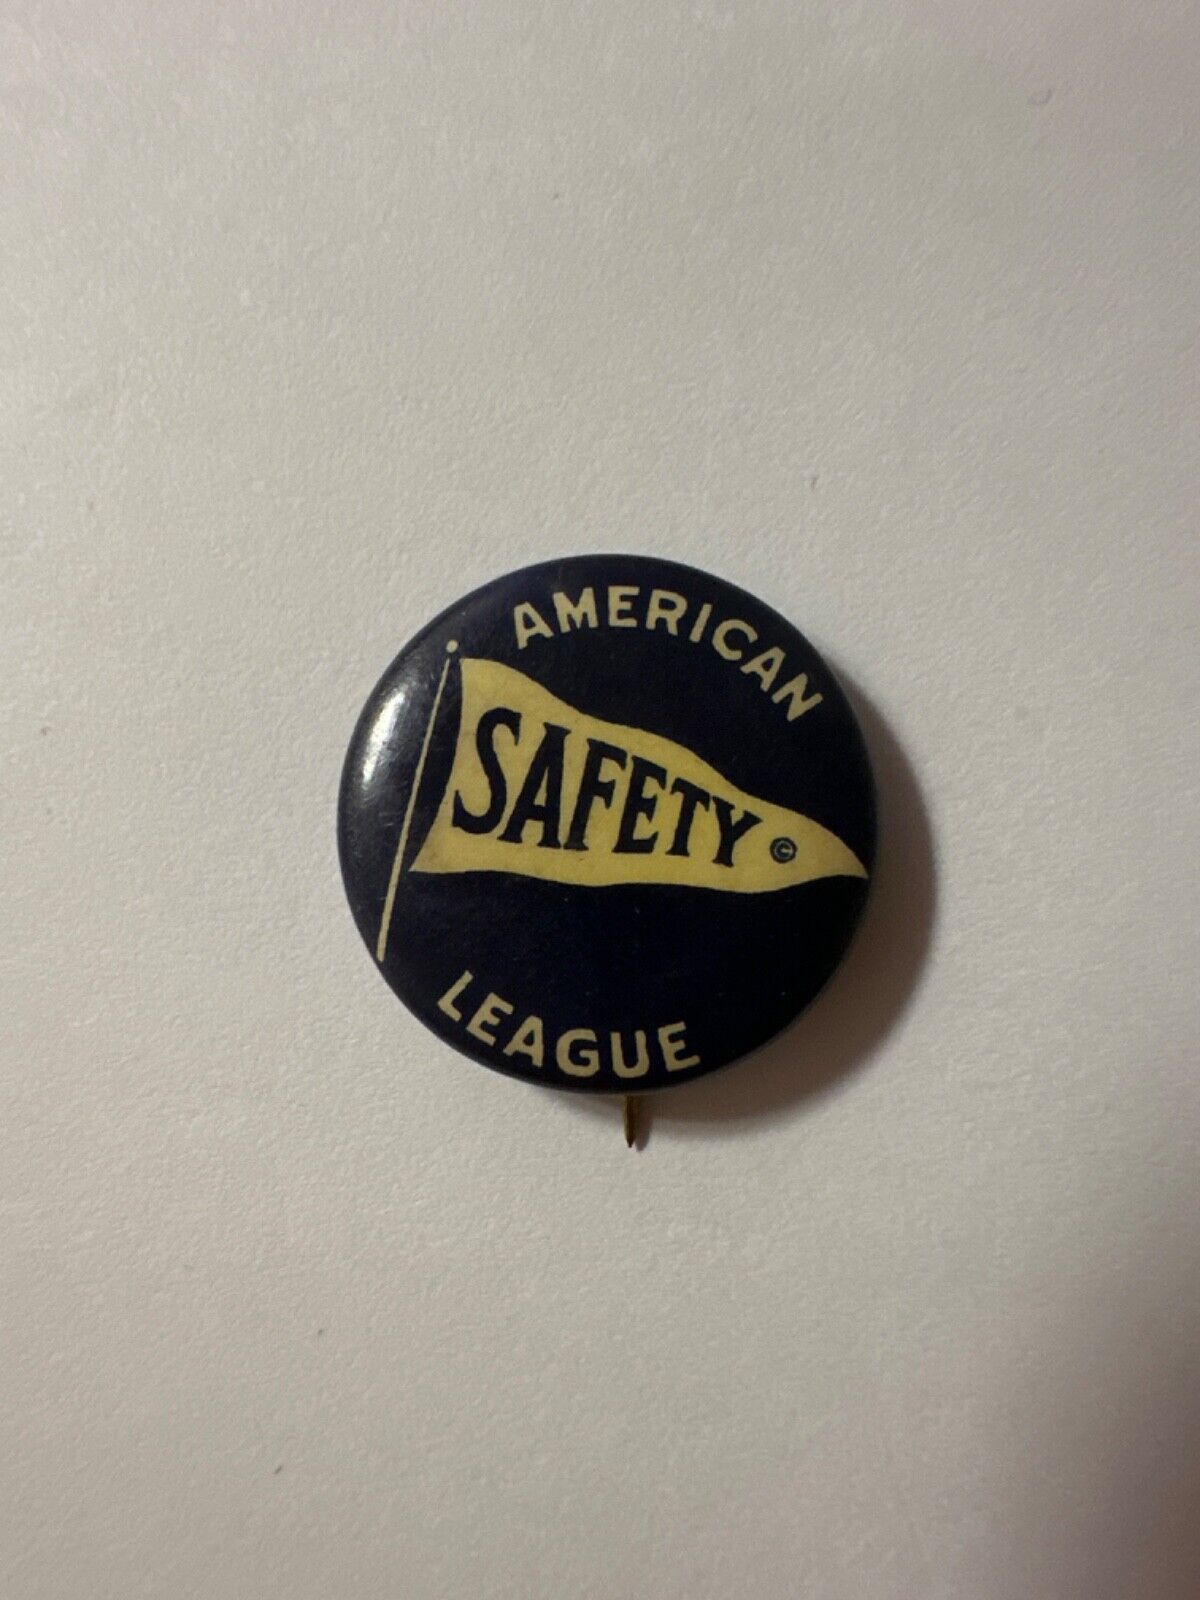 AMERICAN SAFETY LEAGUE FLAG CELLULOID PINBACK, early 1900s 7/8